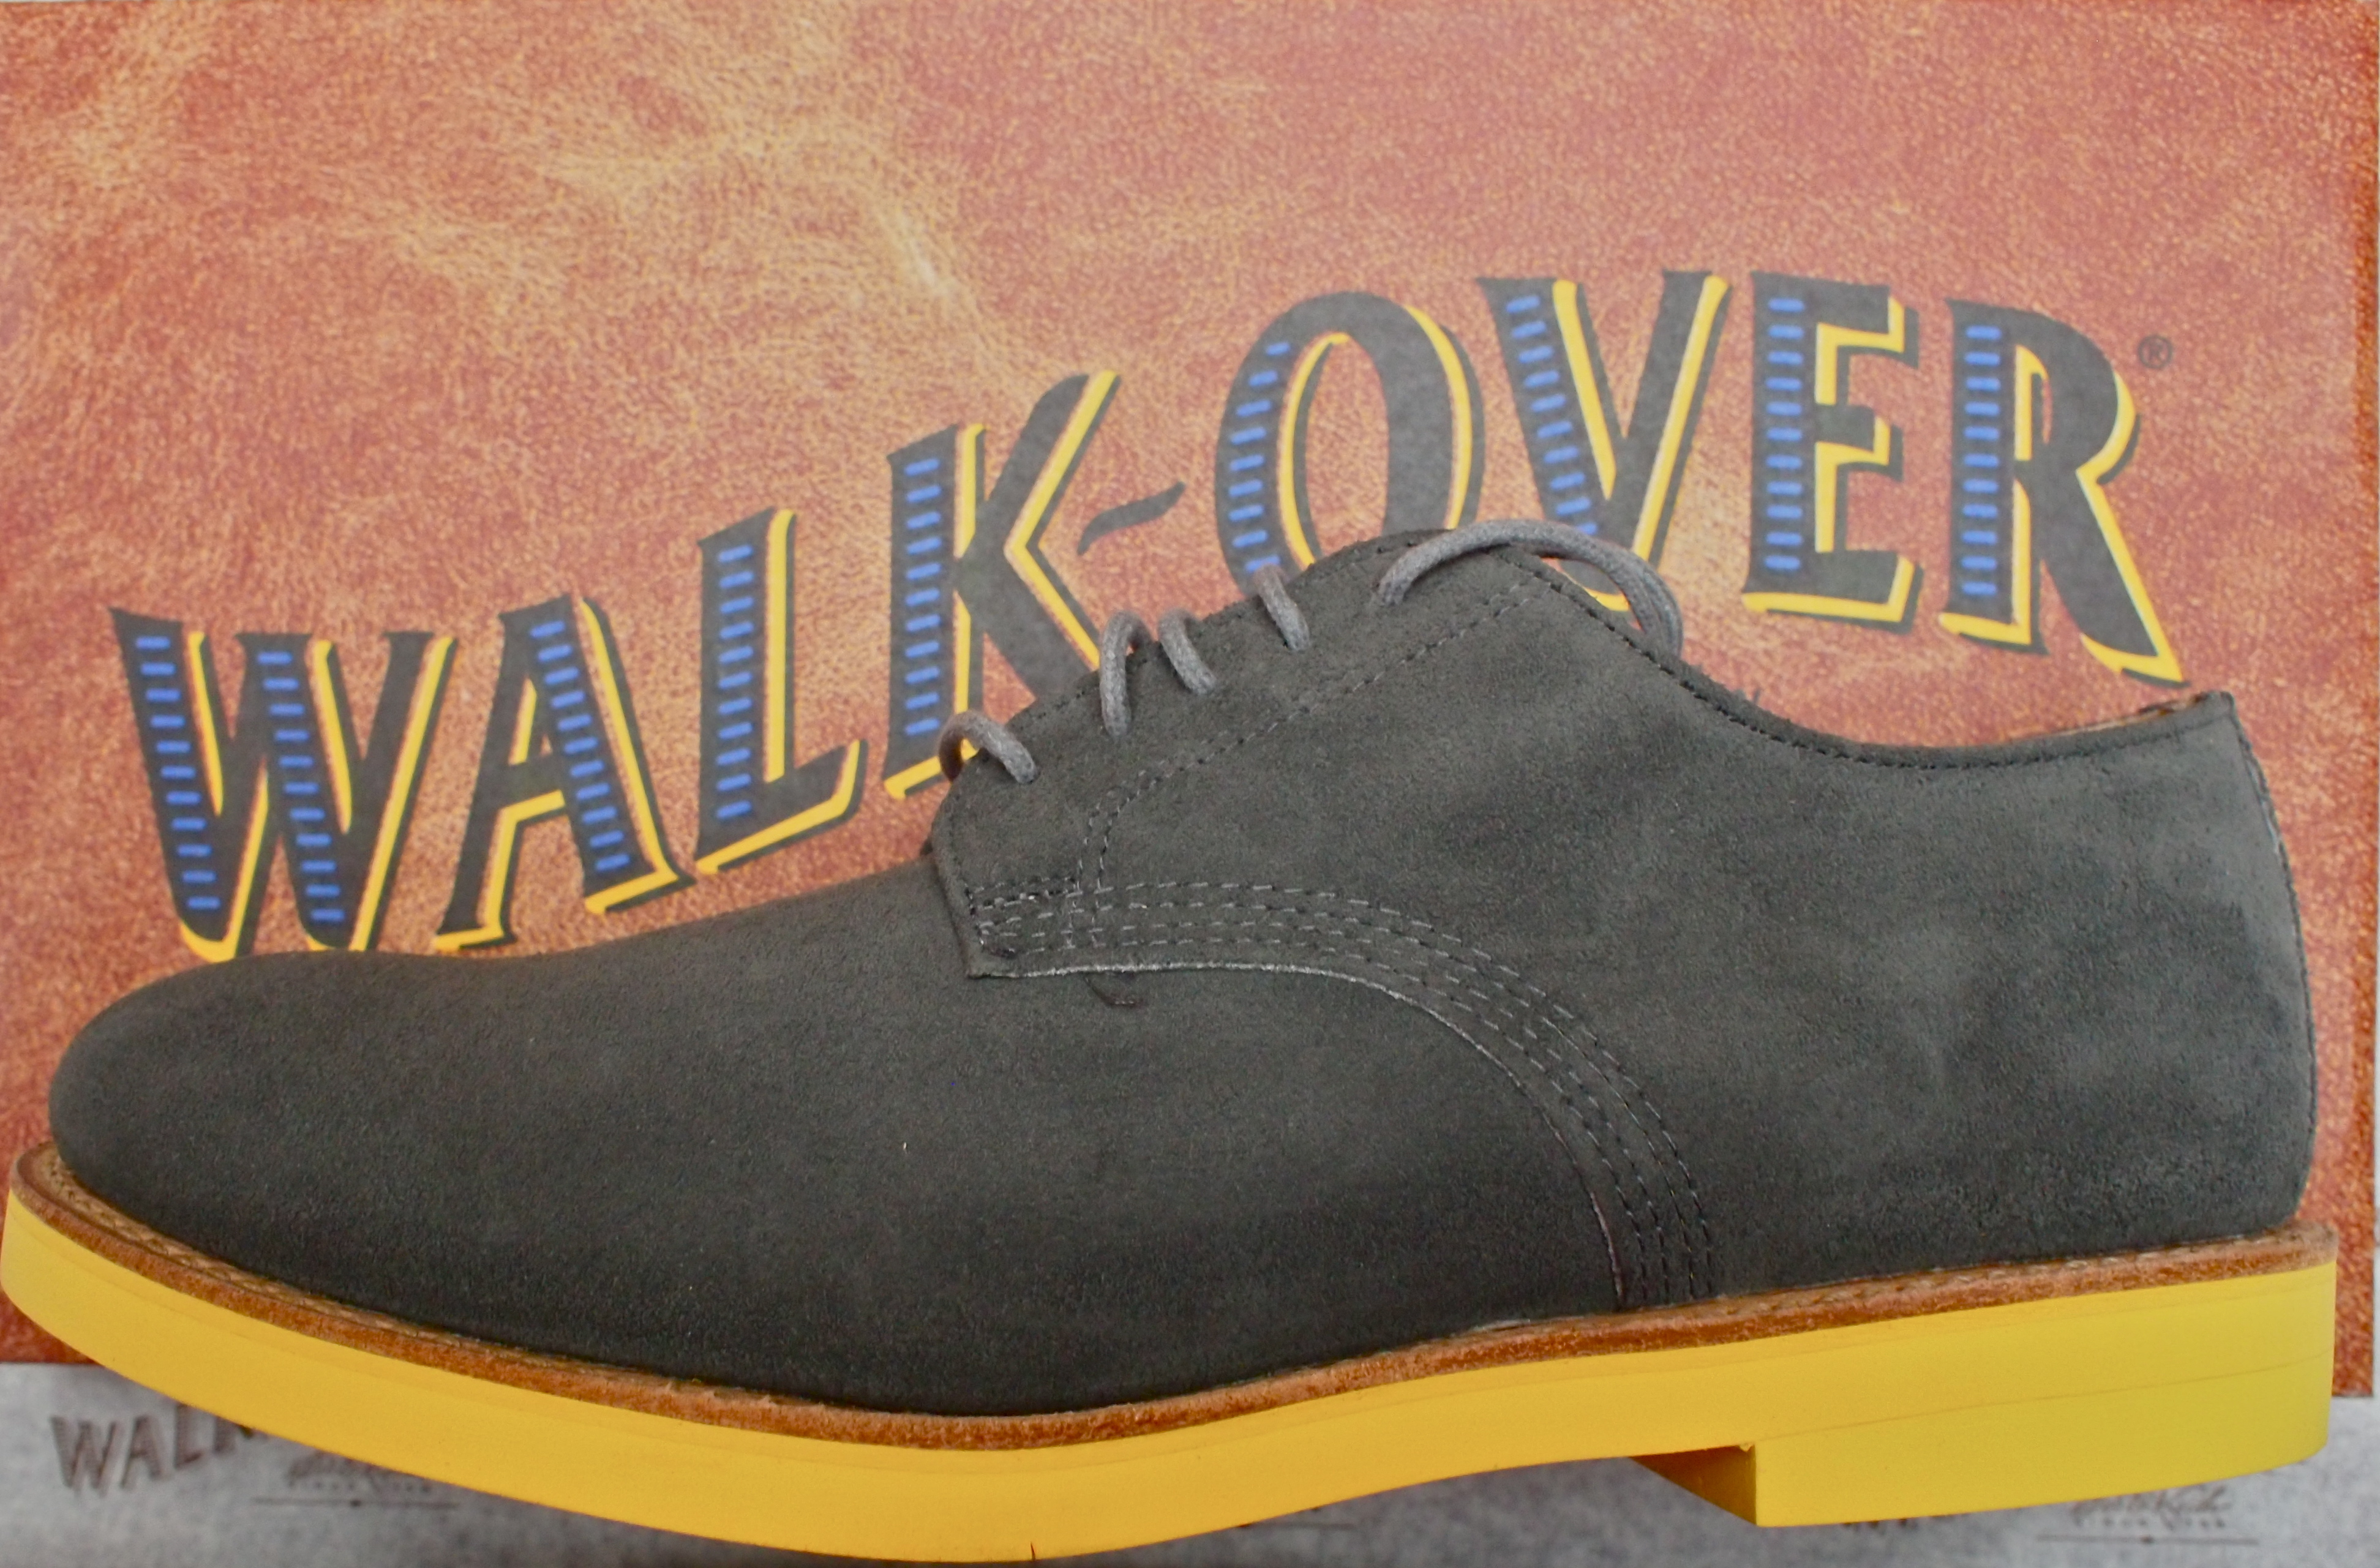 walk over shoes